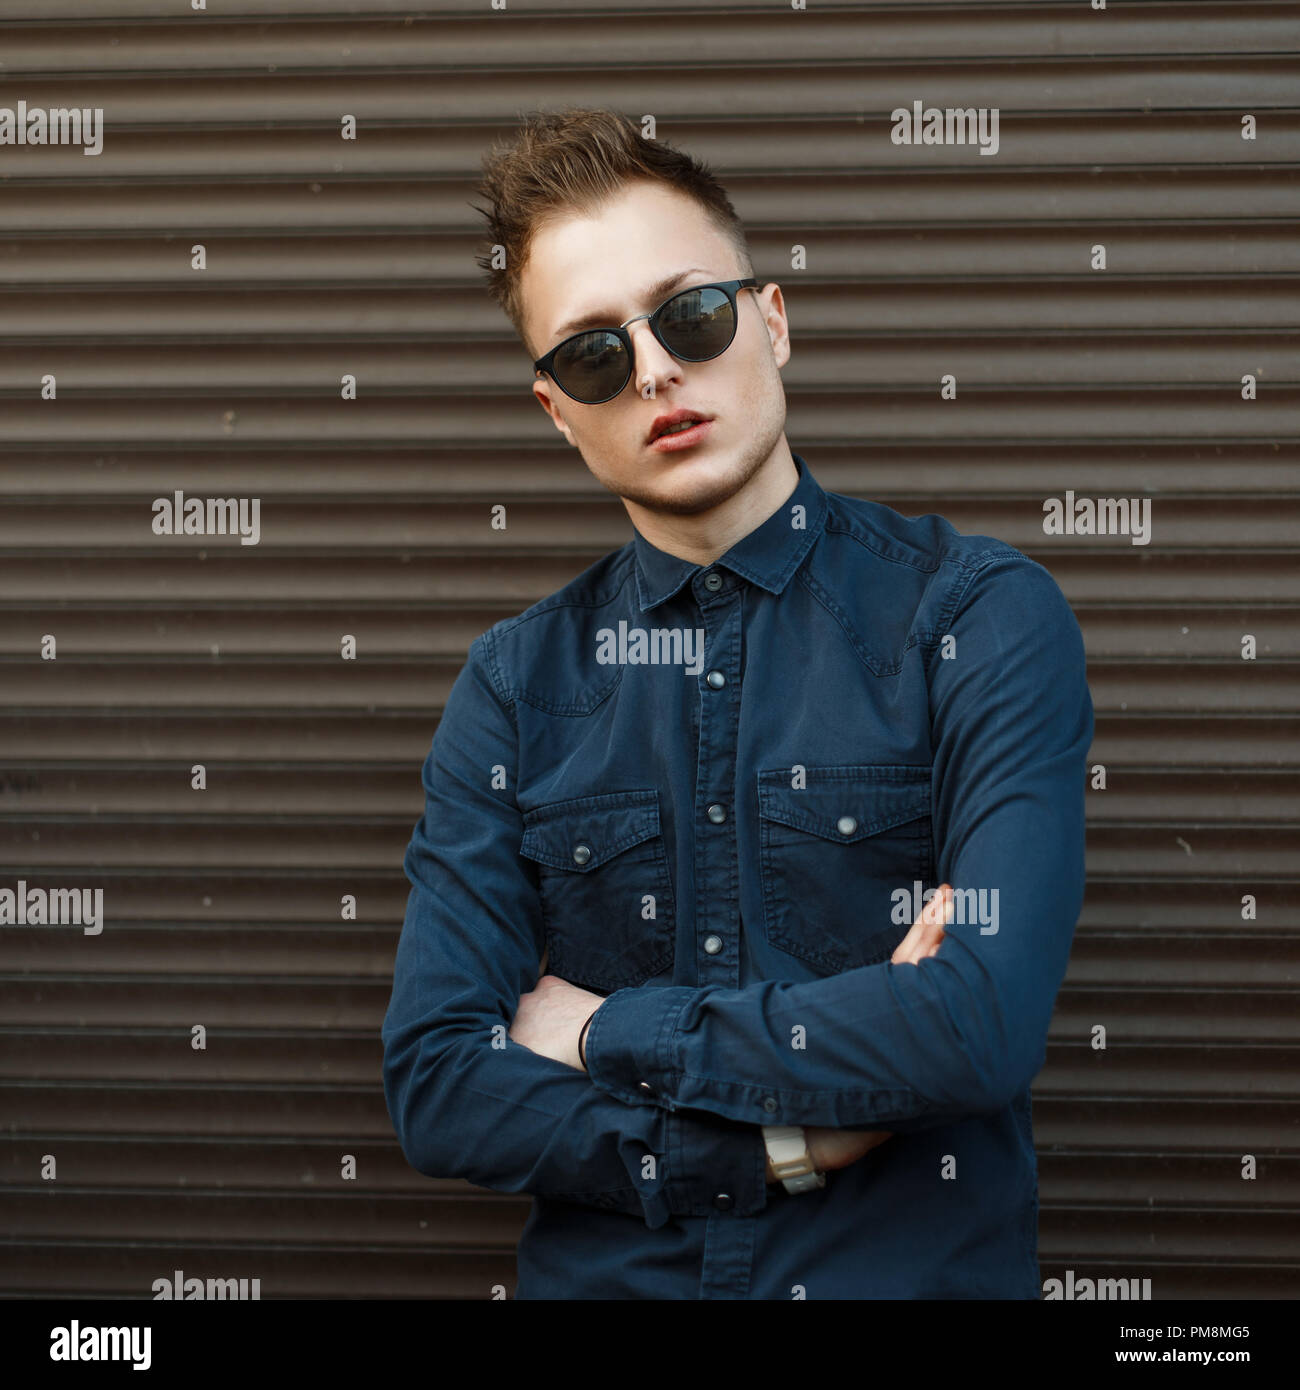 Handsome young man in a blue shirt and sunglasses near a metal wall Stock Photo